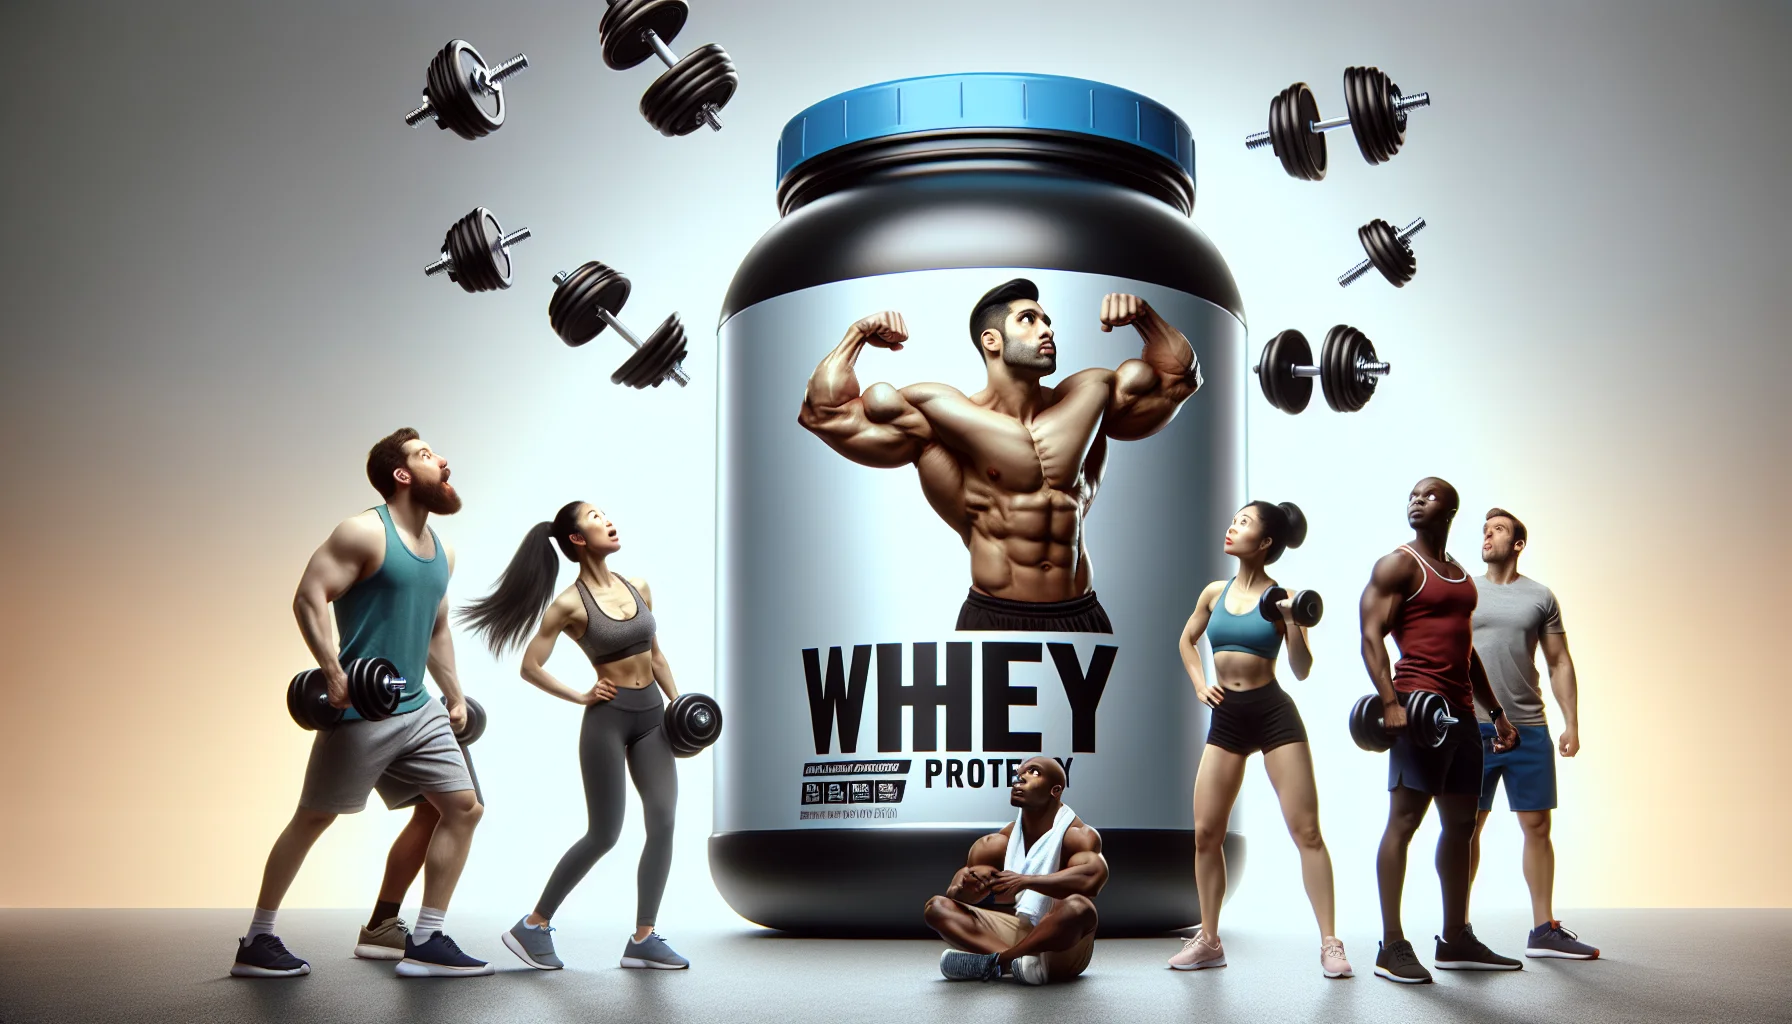 Imagine a humorous gym scene showing a gigantic container of whey protein powder, outshining everything else with its size and glossy packaging. The protein container gets the spotlight as it flexes muscular arms as if it has just finished an intense workout. A group of diverse and motivated individuals, such as an Asian woman, a Black man, and a Middle-Eastern man are left in sheer awe, staring at it with dumbbells mid-lift. Their expressions convey a mix of surprise, admiration, and a dash of envy. The scene is set to motivate people to utilize supplements for sports and exercise.